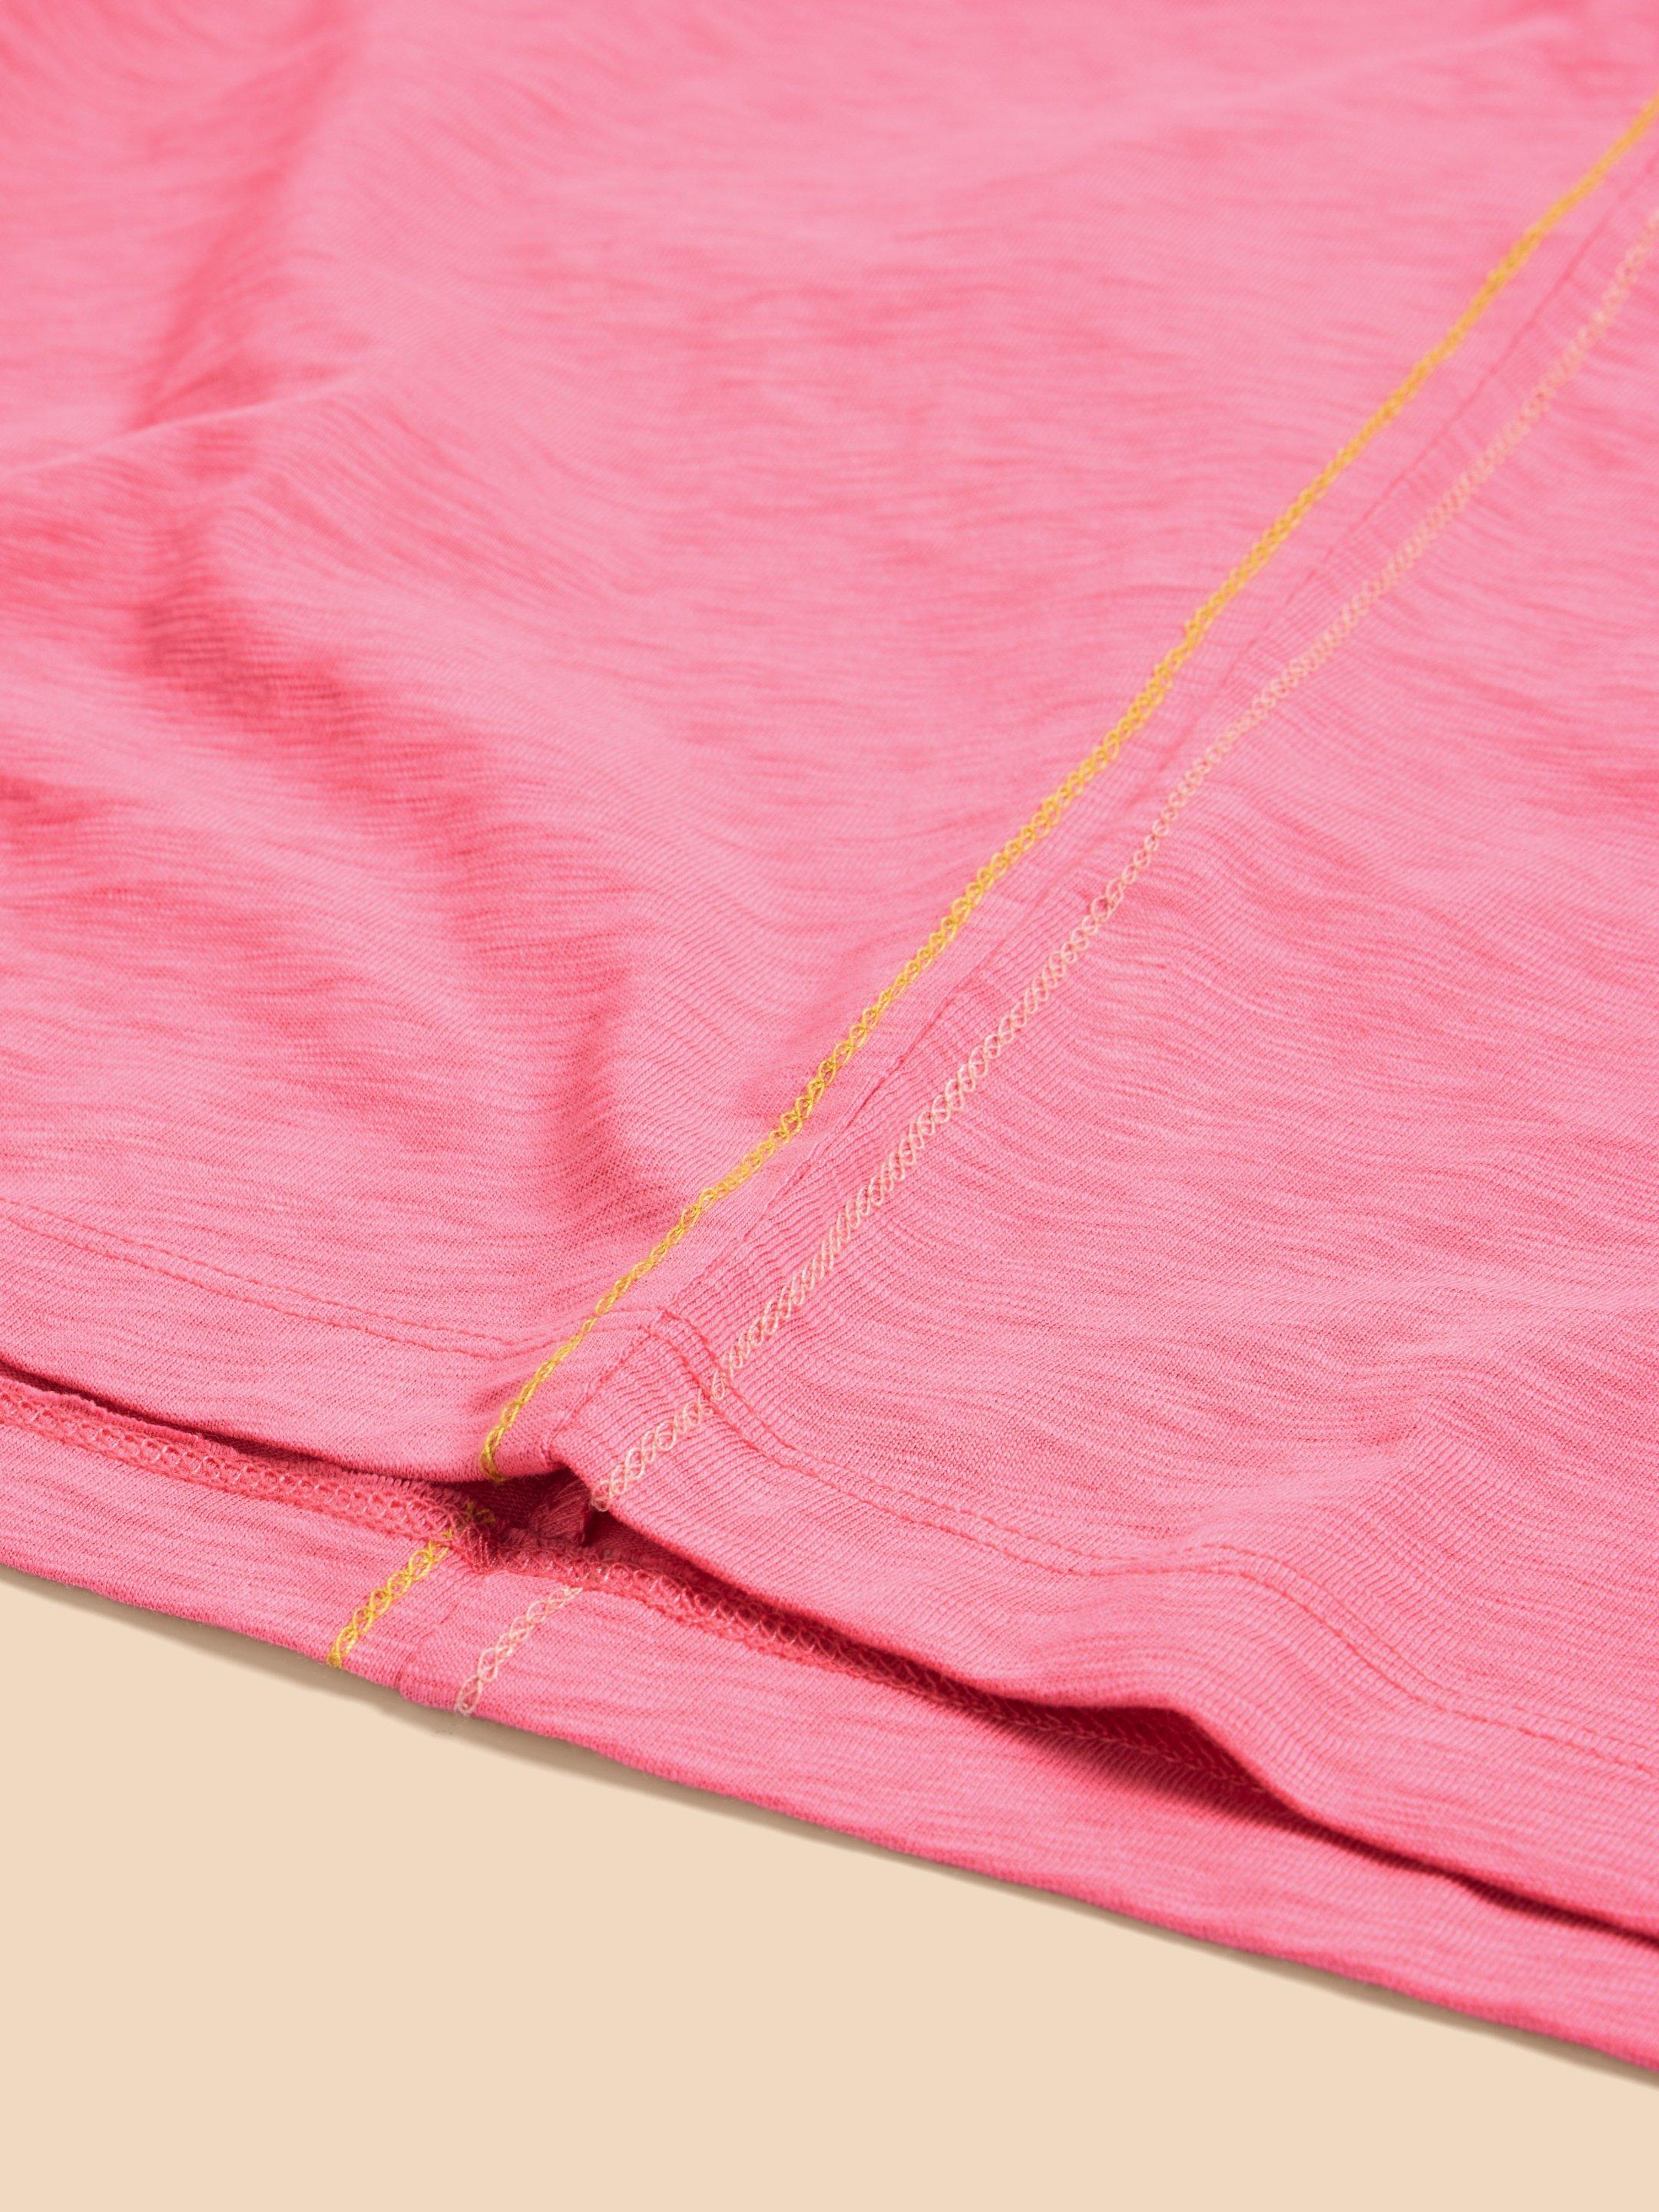 NELLY LS PRINTED TEE in MID PINK - FLAT DETAIL